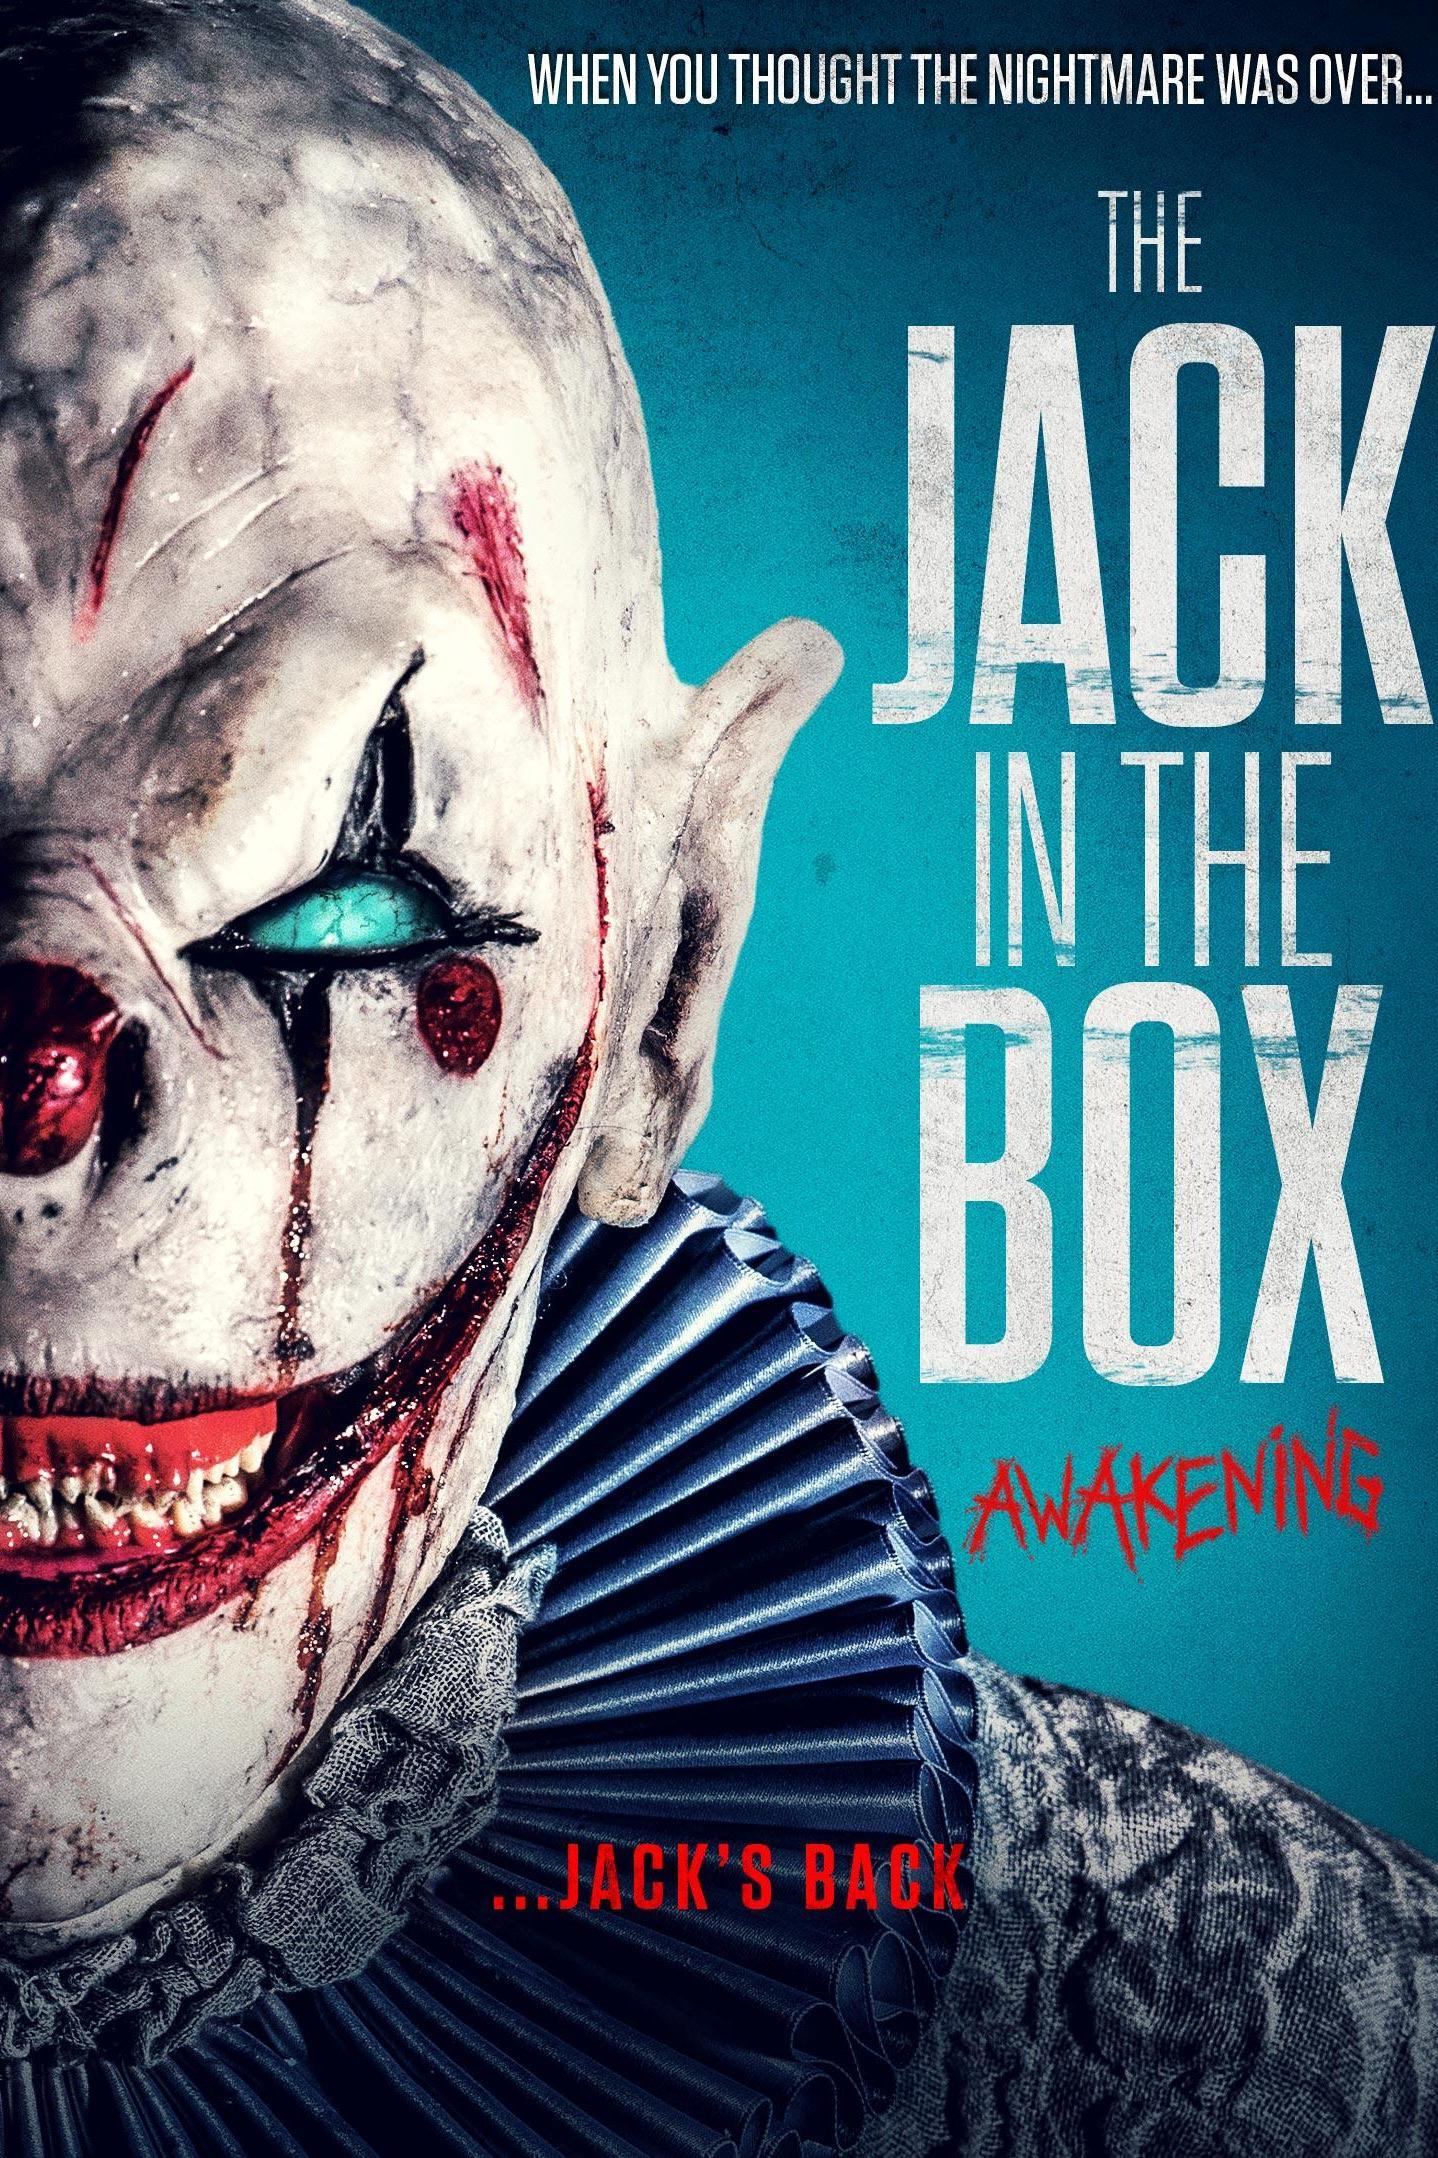 The Jack in the Box 2